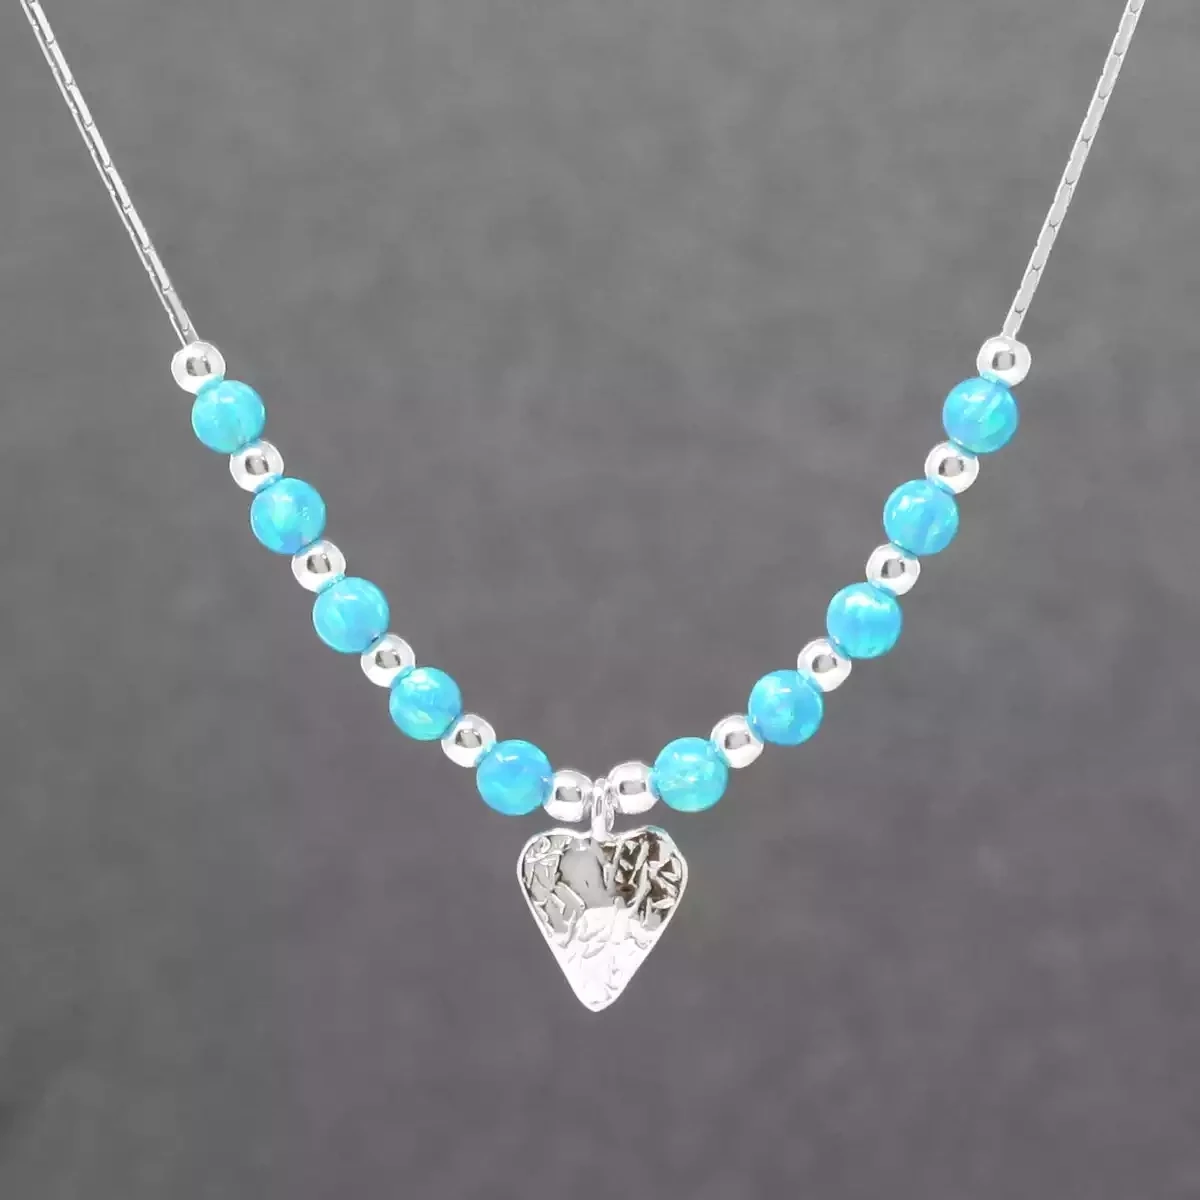 Hammered Heart Charm Silver and Opalite Necklace - Aqua by Lavan